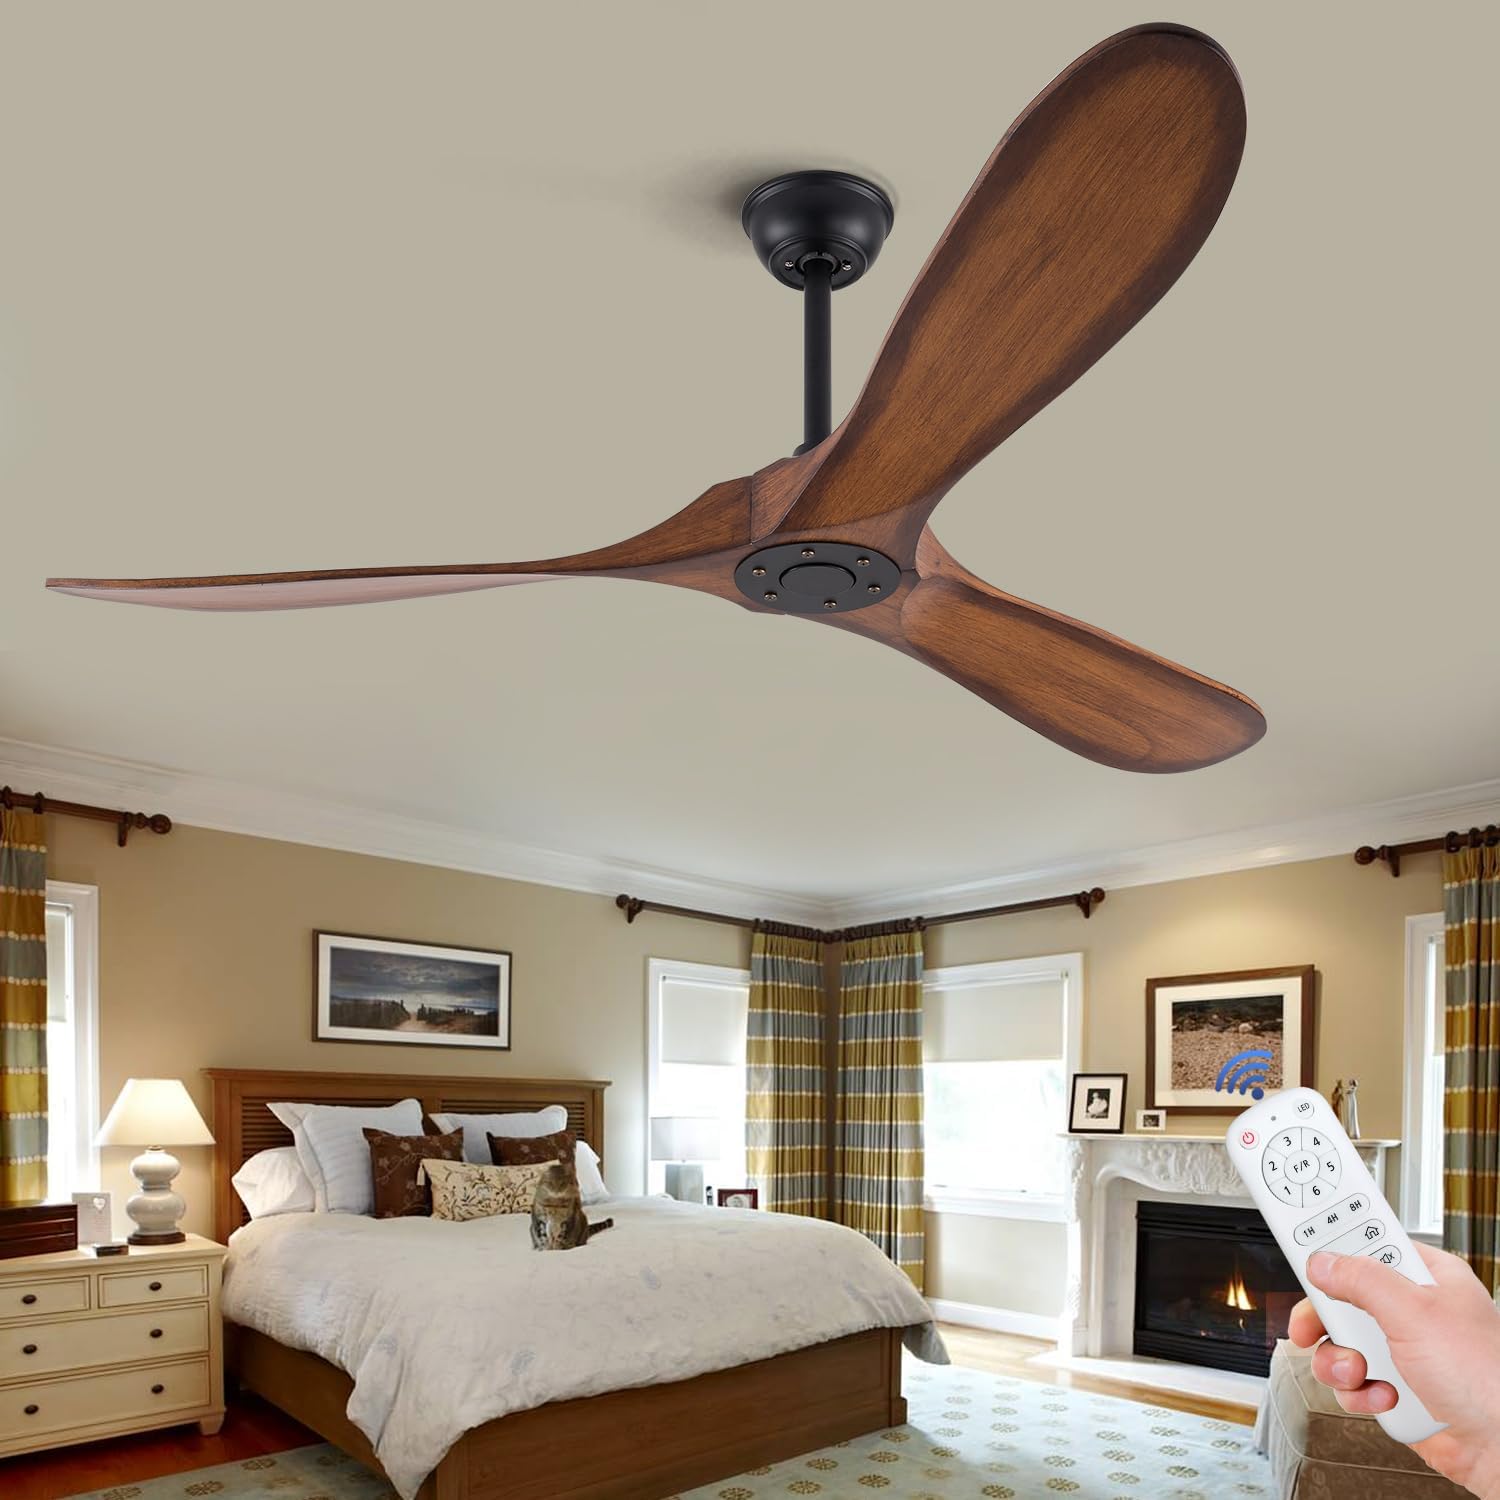 BOJUE 42 Wood Ceiling Fan Without Light Remote Control, Low Profile Ceiling Fan Indoor Outdoor with 3 blade for Patio Living Room, Bedroom, Office, Summer House, Etc (Light Brown Blades)